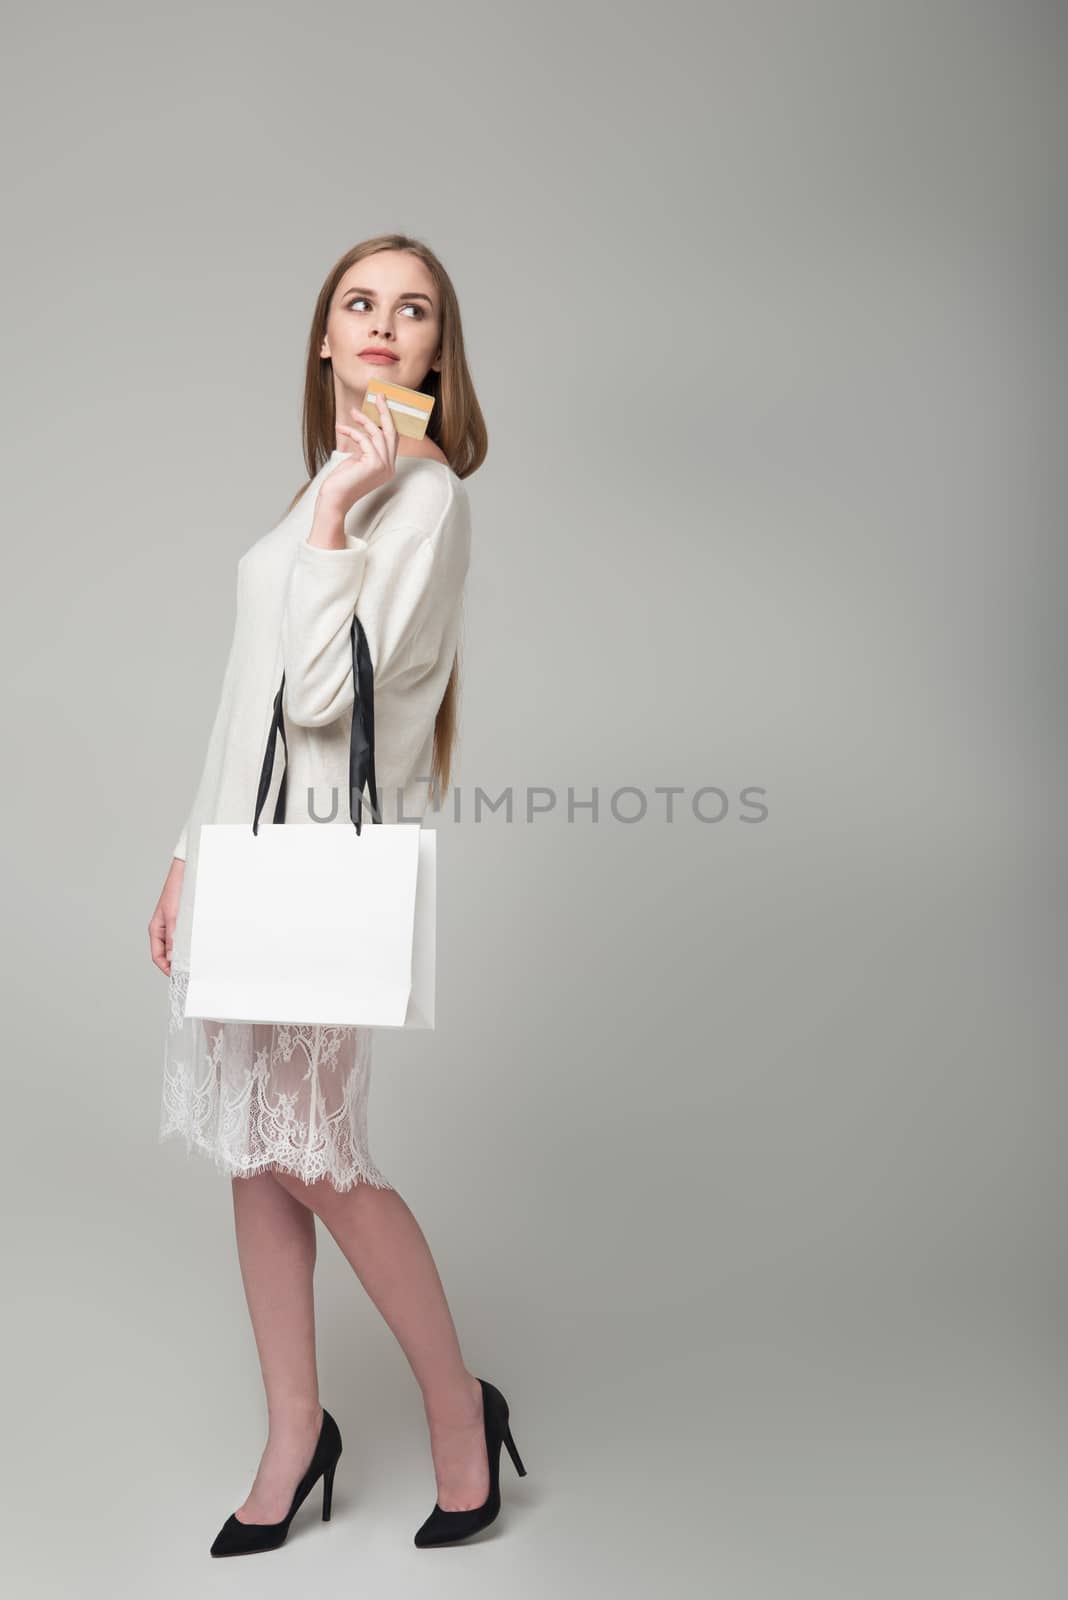 Young model long-haired blond girl in white short dress with lace stands holding white package with copy space